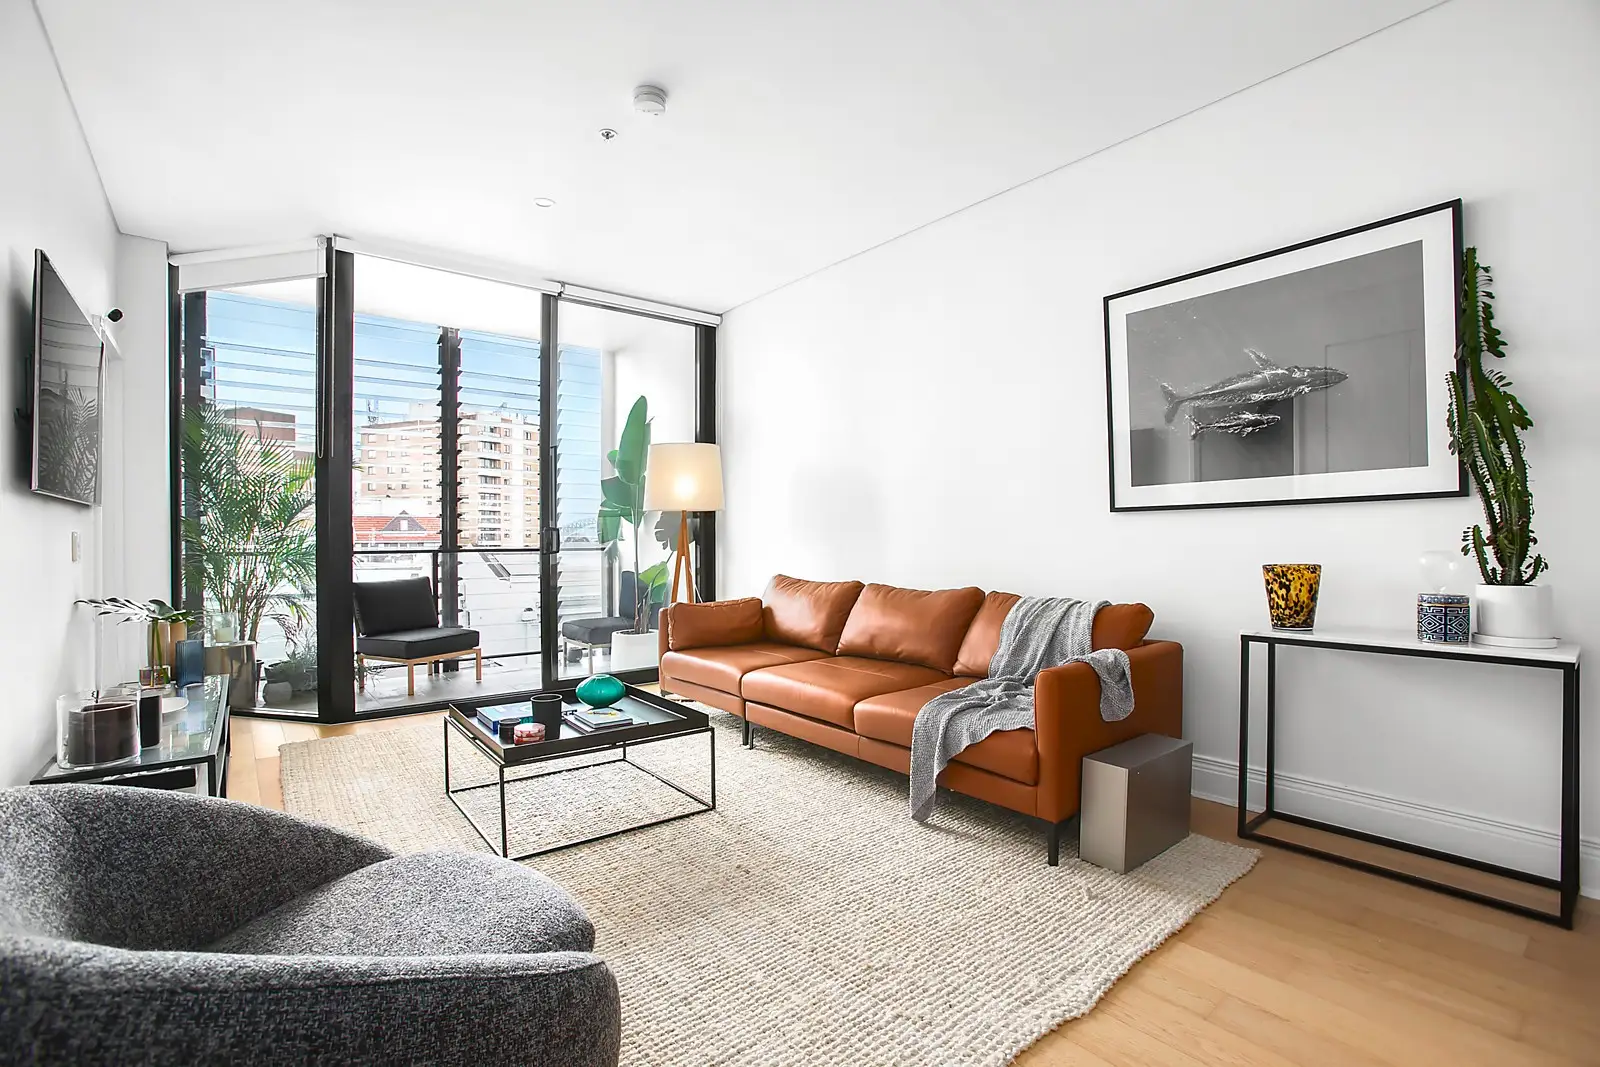 Photo #1: 305/18 Bayswater Road, Potts Point - Sold by Sydney Sotheby's International Realty